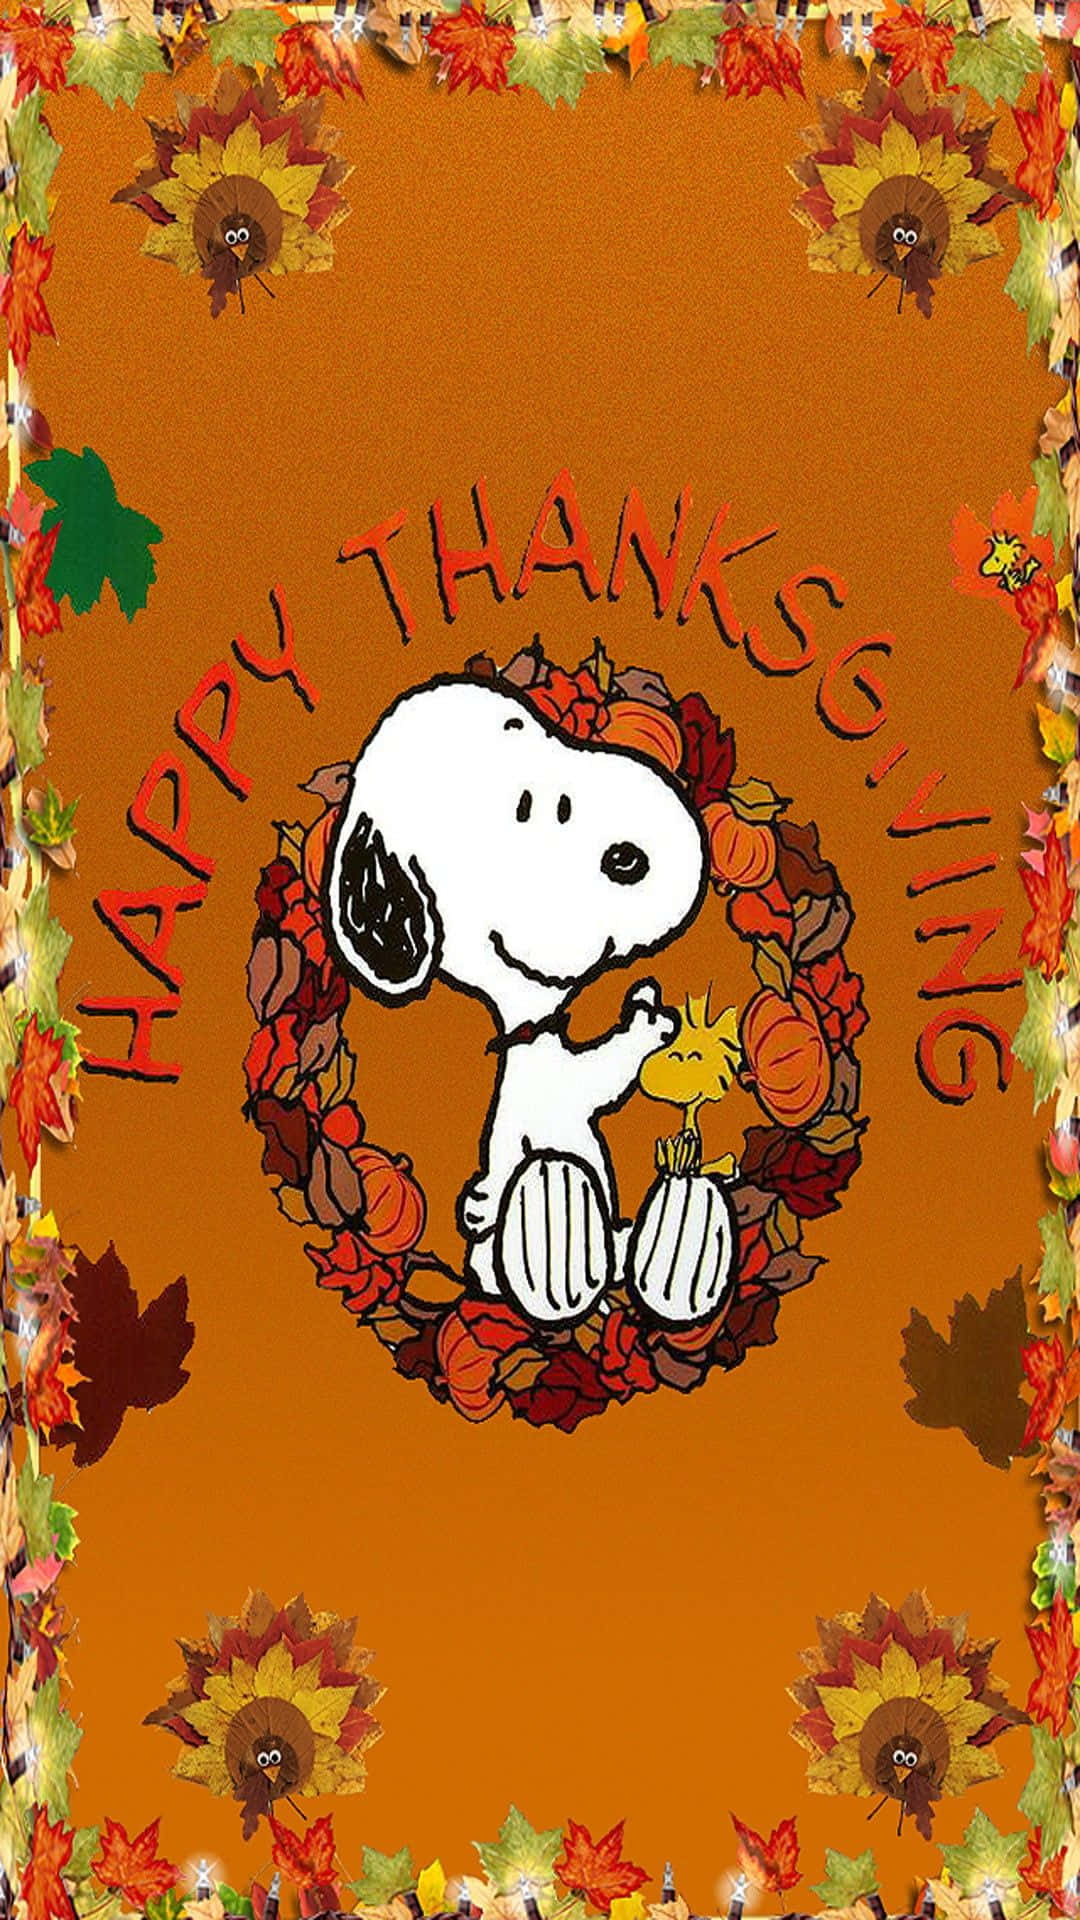 Snoopy Celebrates Thanksgiving With A Parade Of Delicious Treats Background